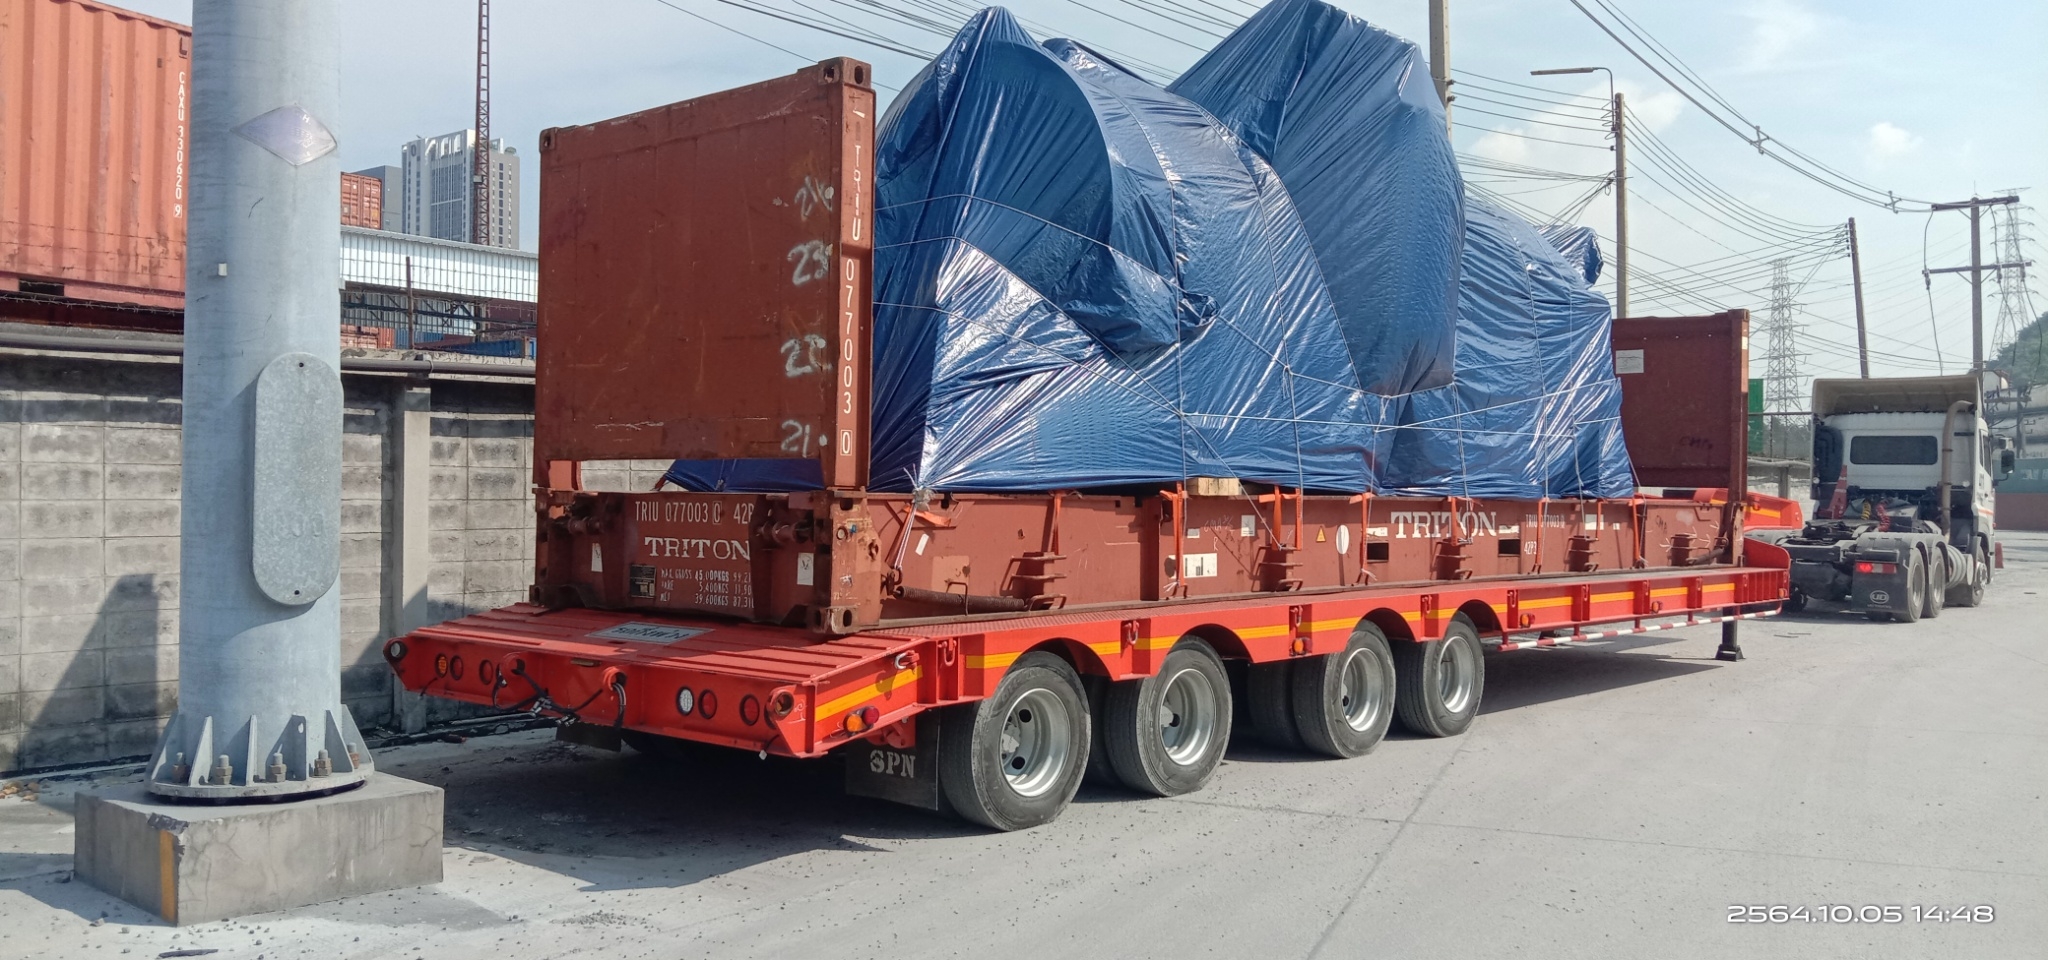 LINE_ALBUM_Shipping _ Logistics Services in Myanmar_๒๑๑๐๒๒_1